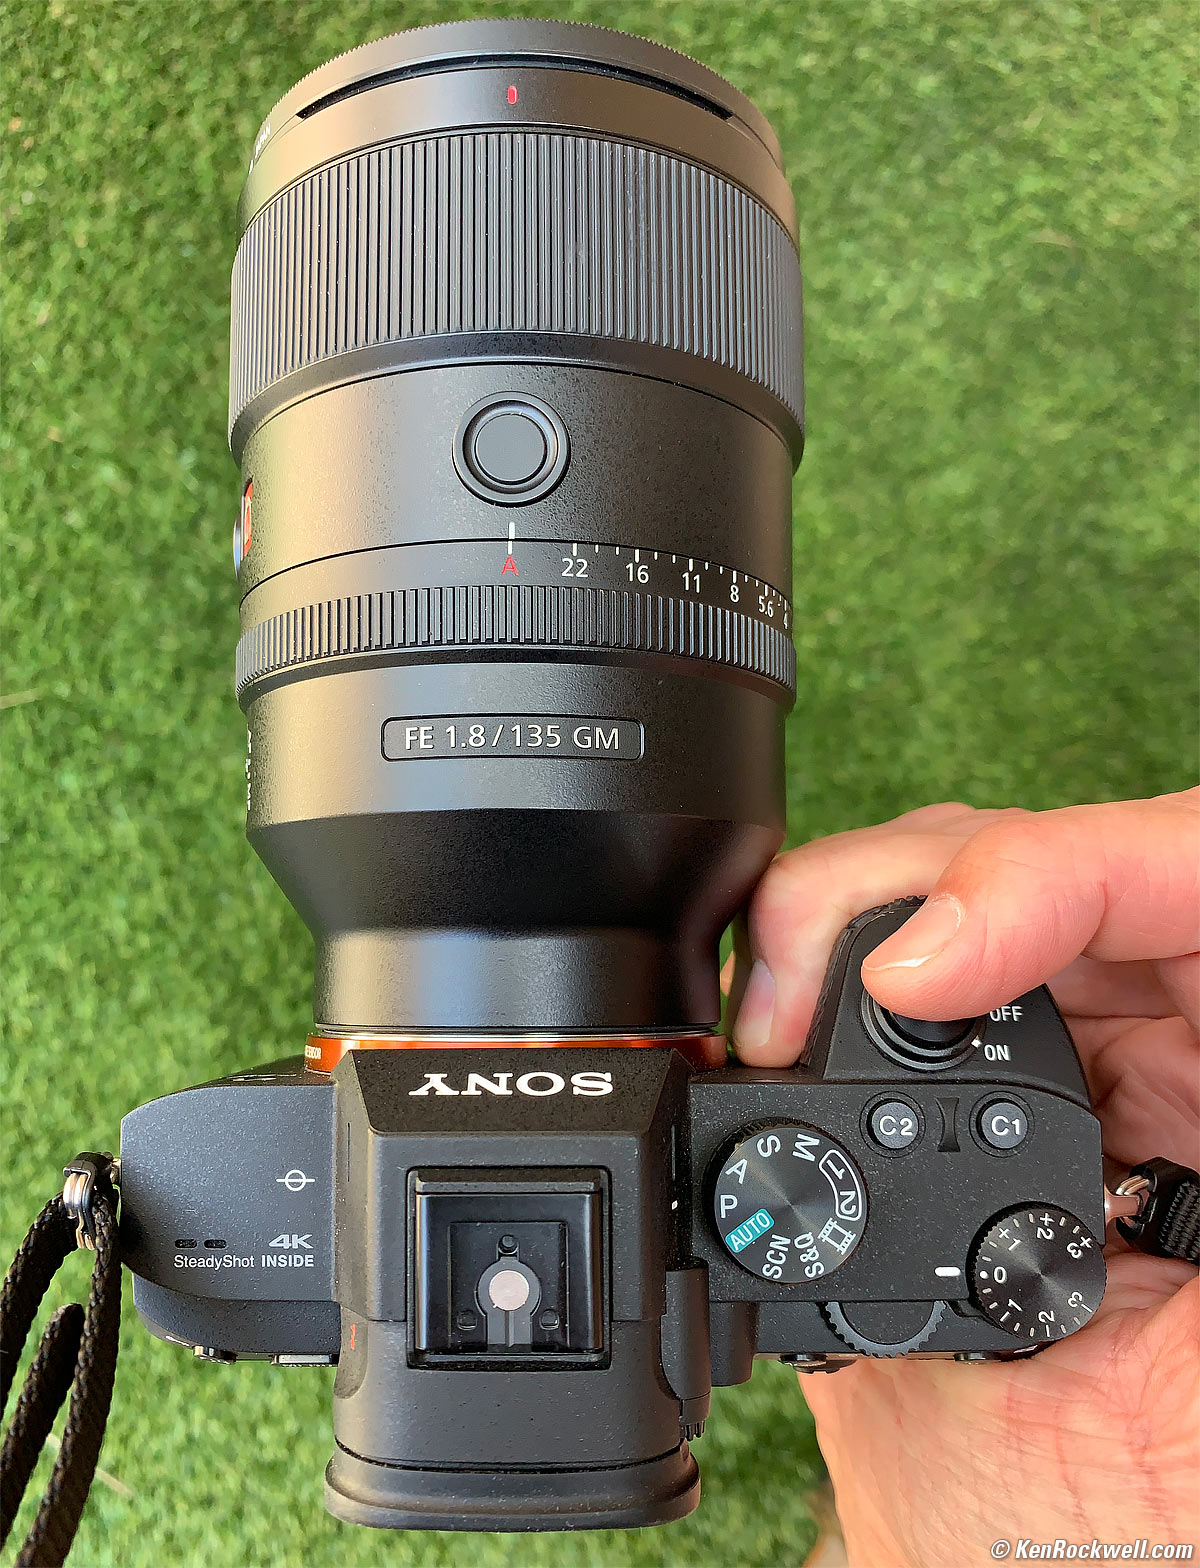 Sony FE 135mm f/1.8 GM Review